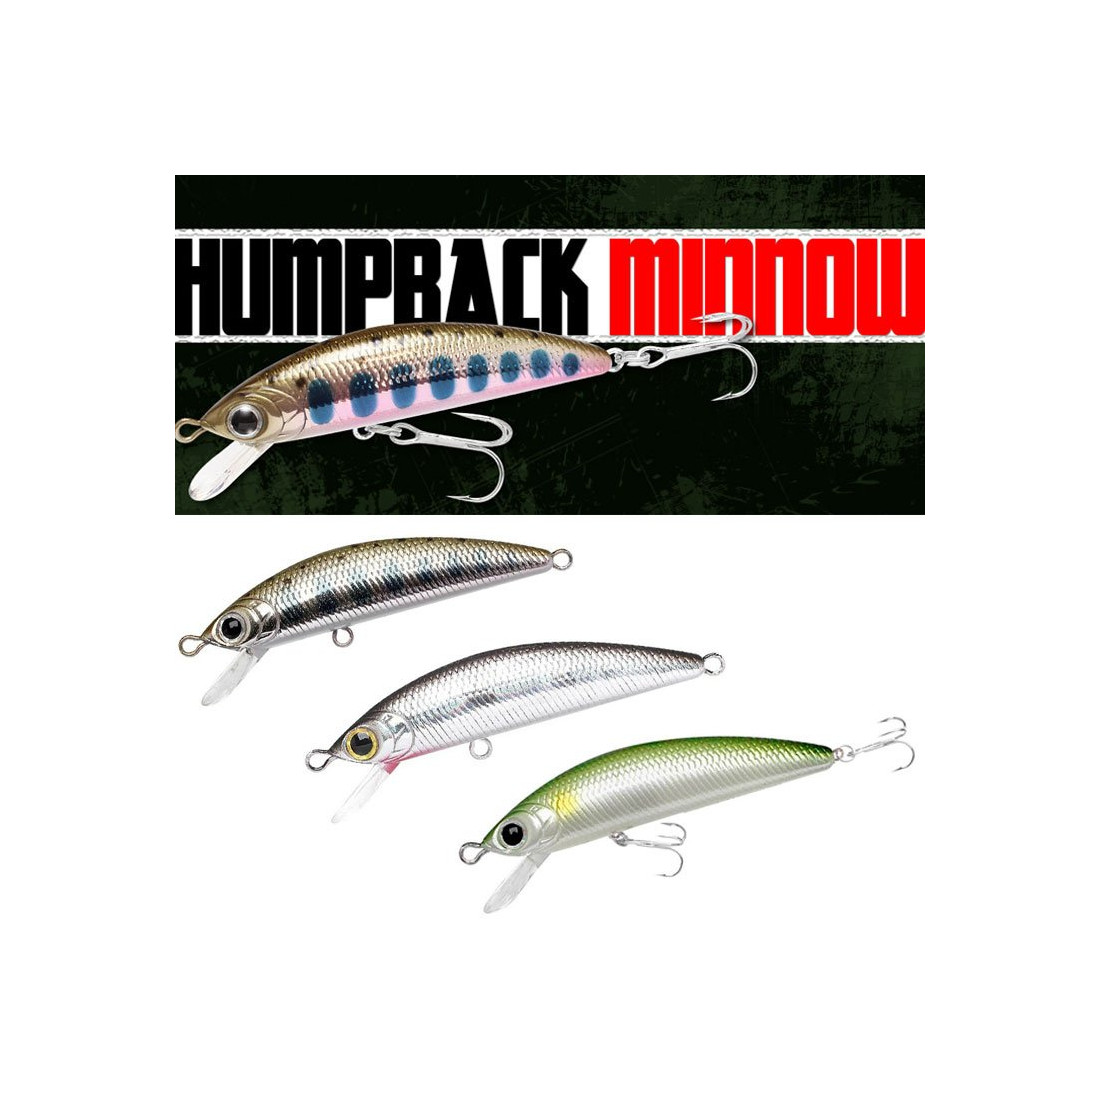  5 cm  Lucky Craft Humpback Minnow 50SP   yamame Silver  3,2 g  